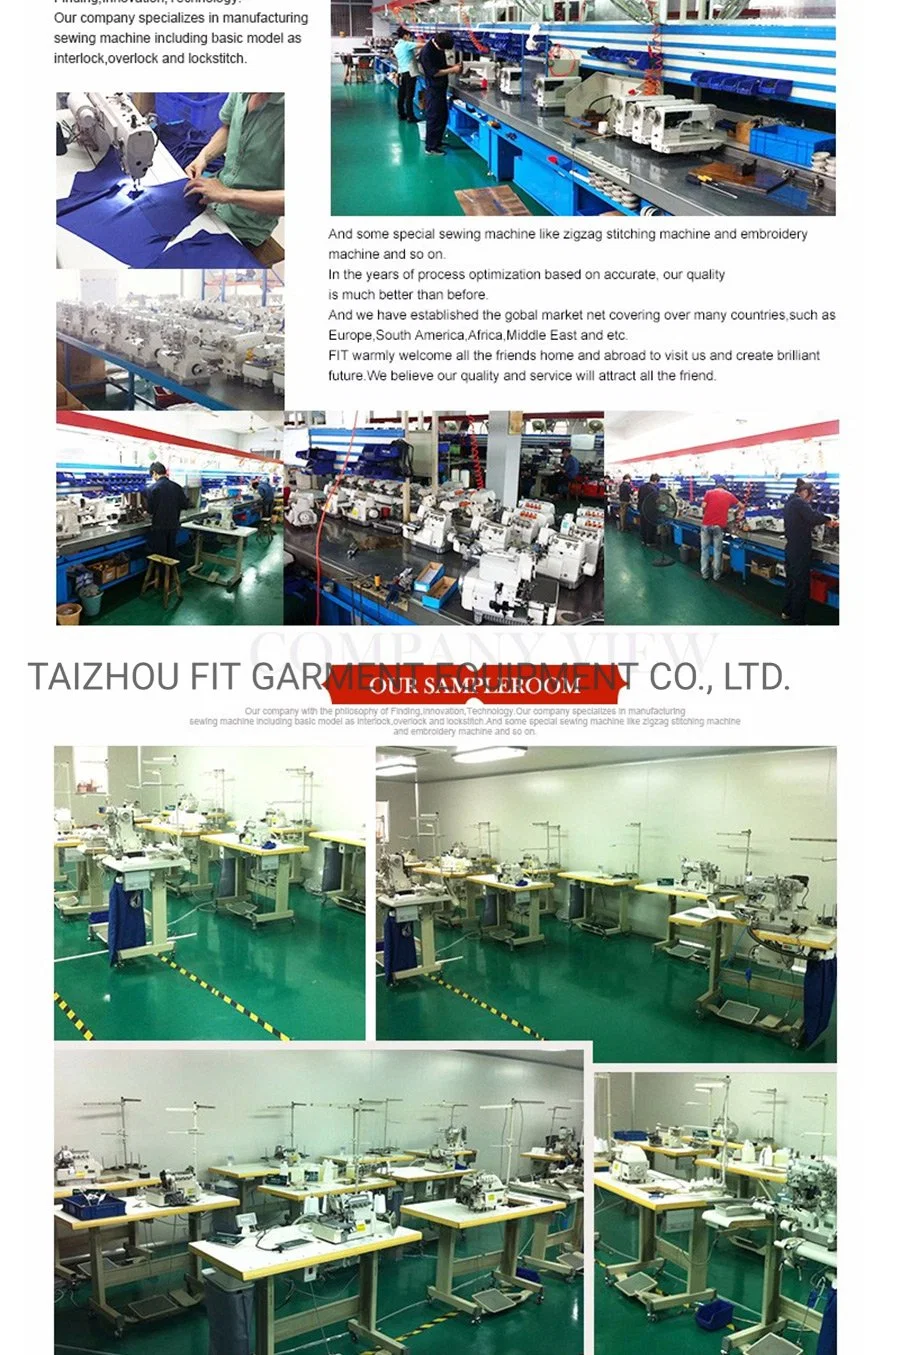 Double Needle Flat-Bed Belt Loop Machine with Cutter for Jeans (FIT 2000C)